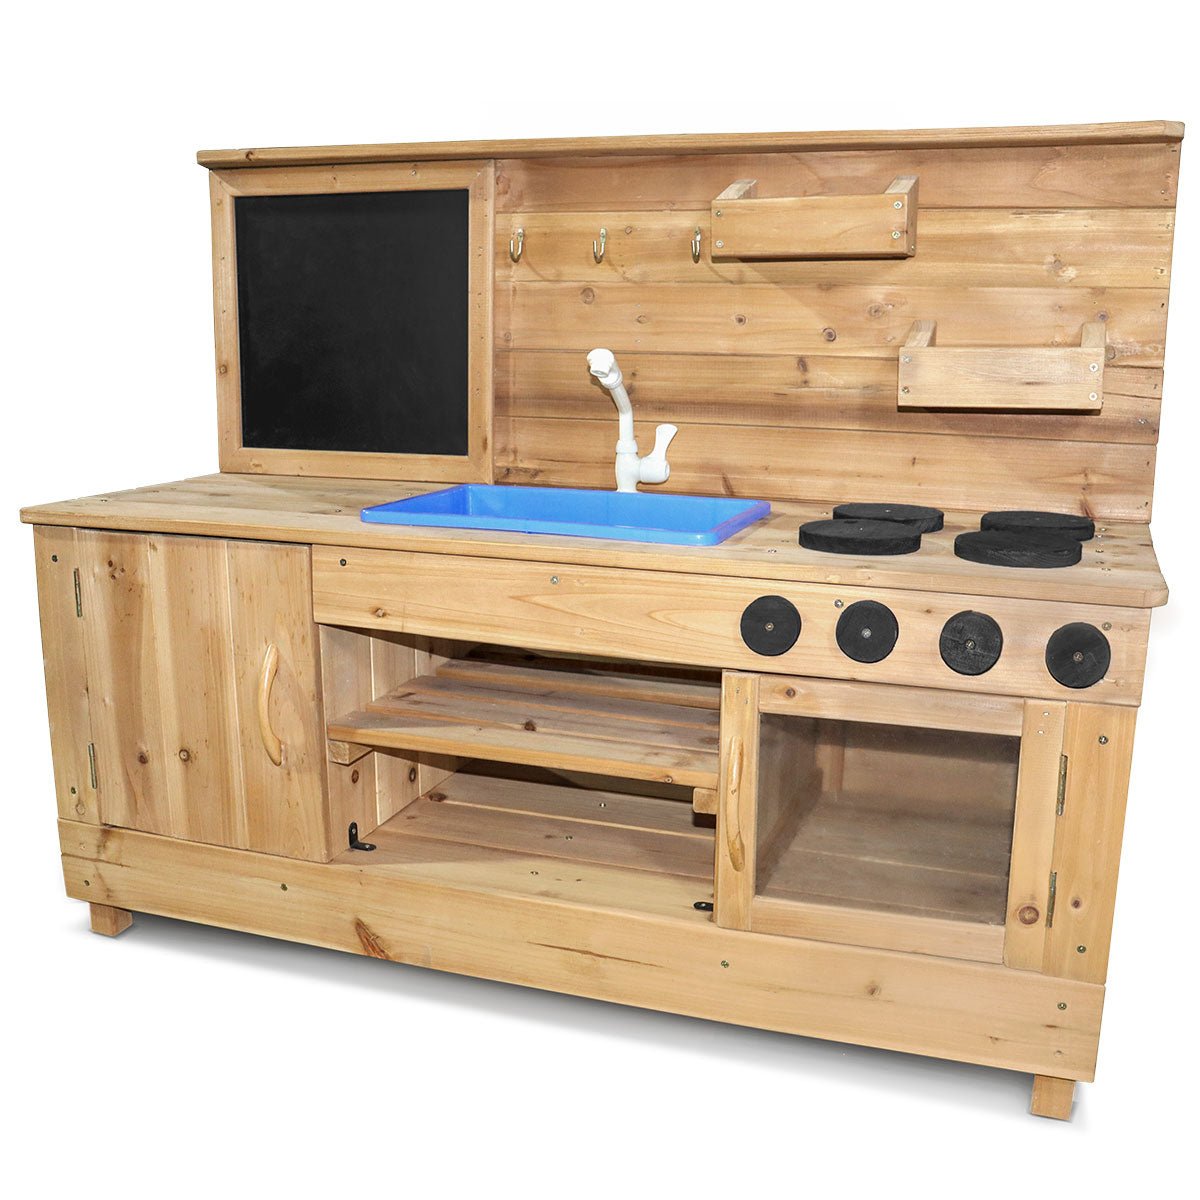 Buy Roma V2 Outdoor Play Kitchen: Sparking Playful Cooking Joy